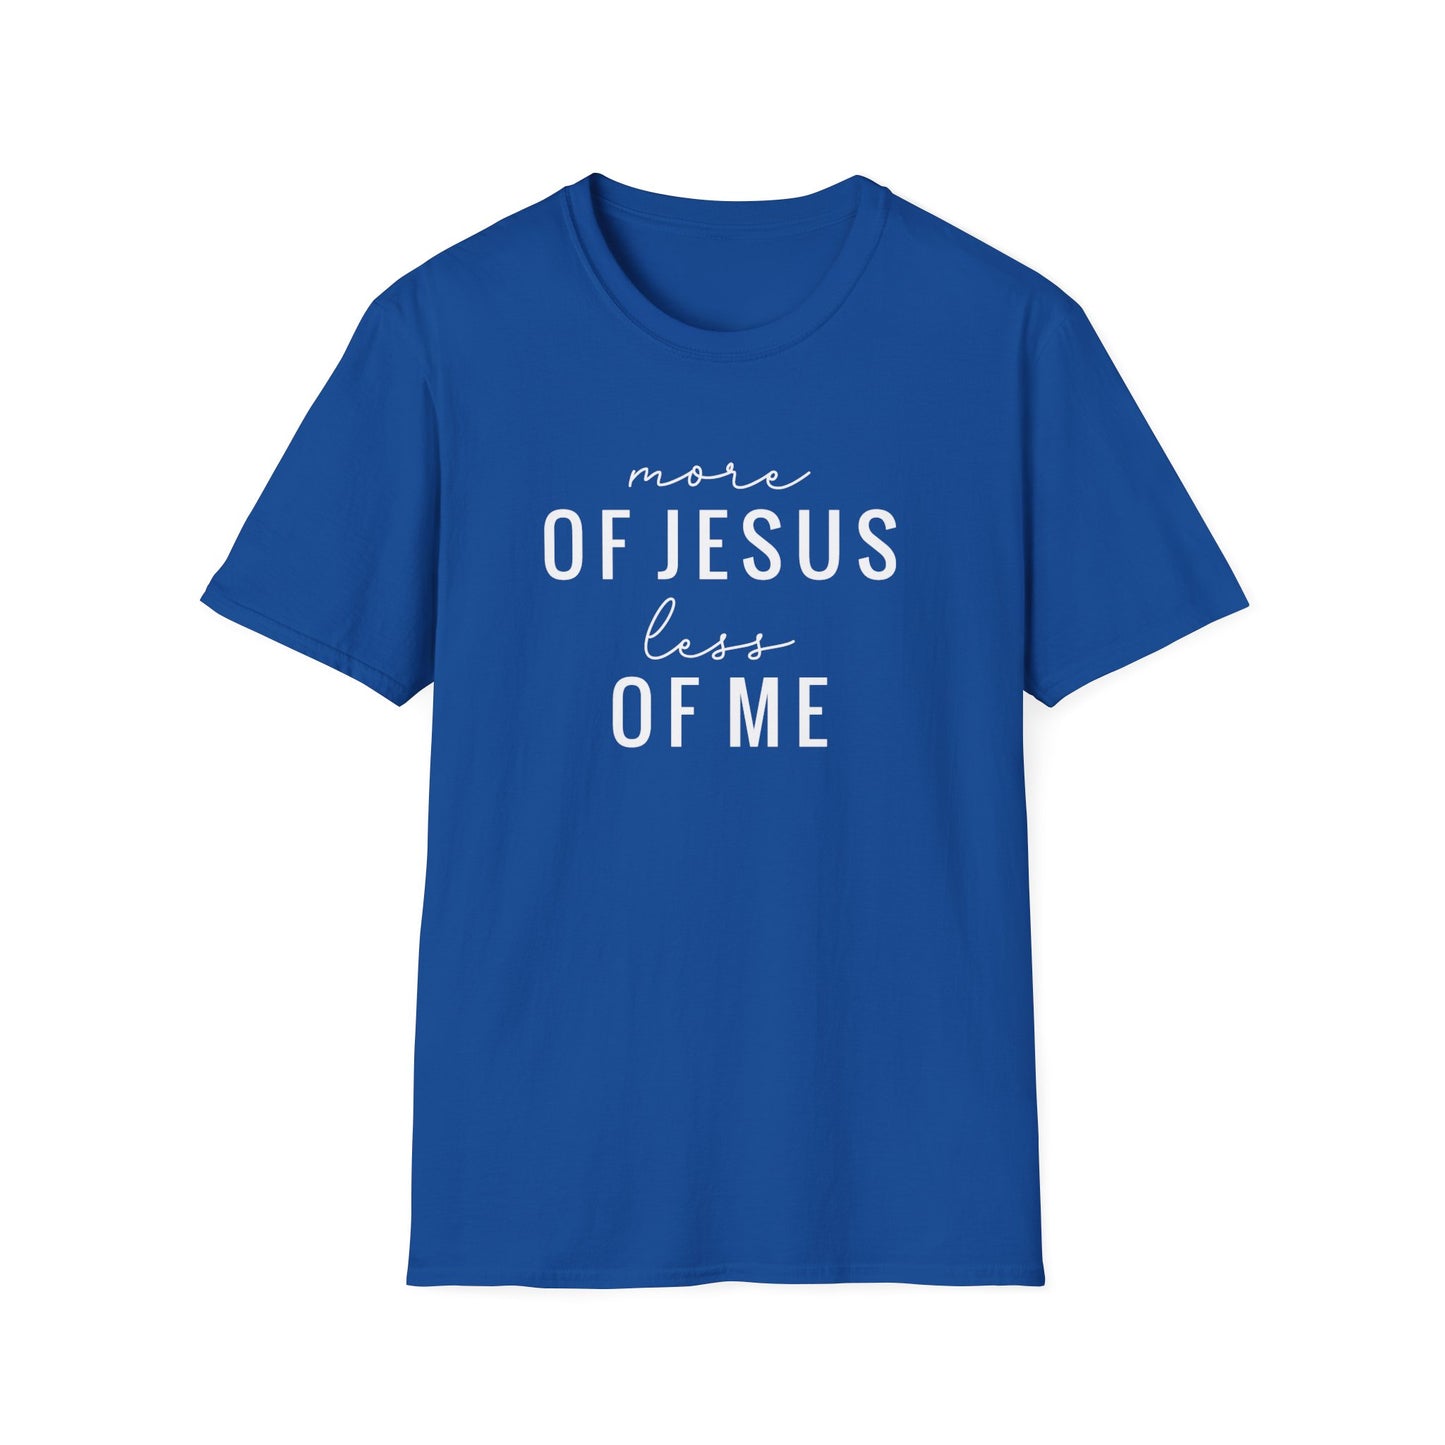 More of Jesus Less of Me Unisex Softstyle T-Shirt